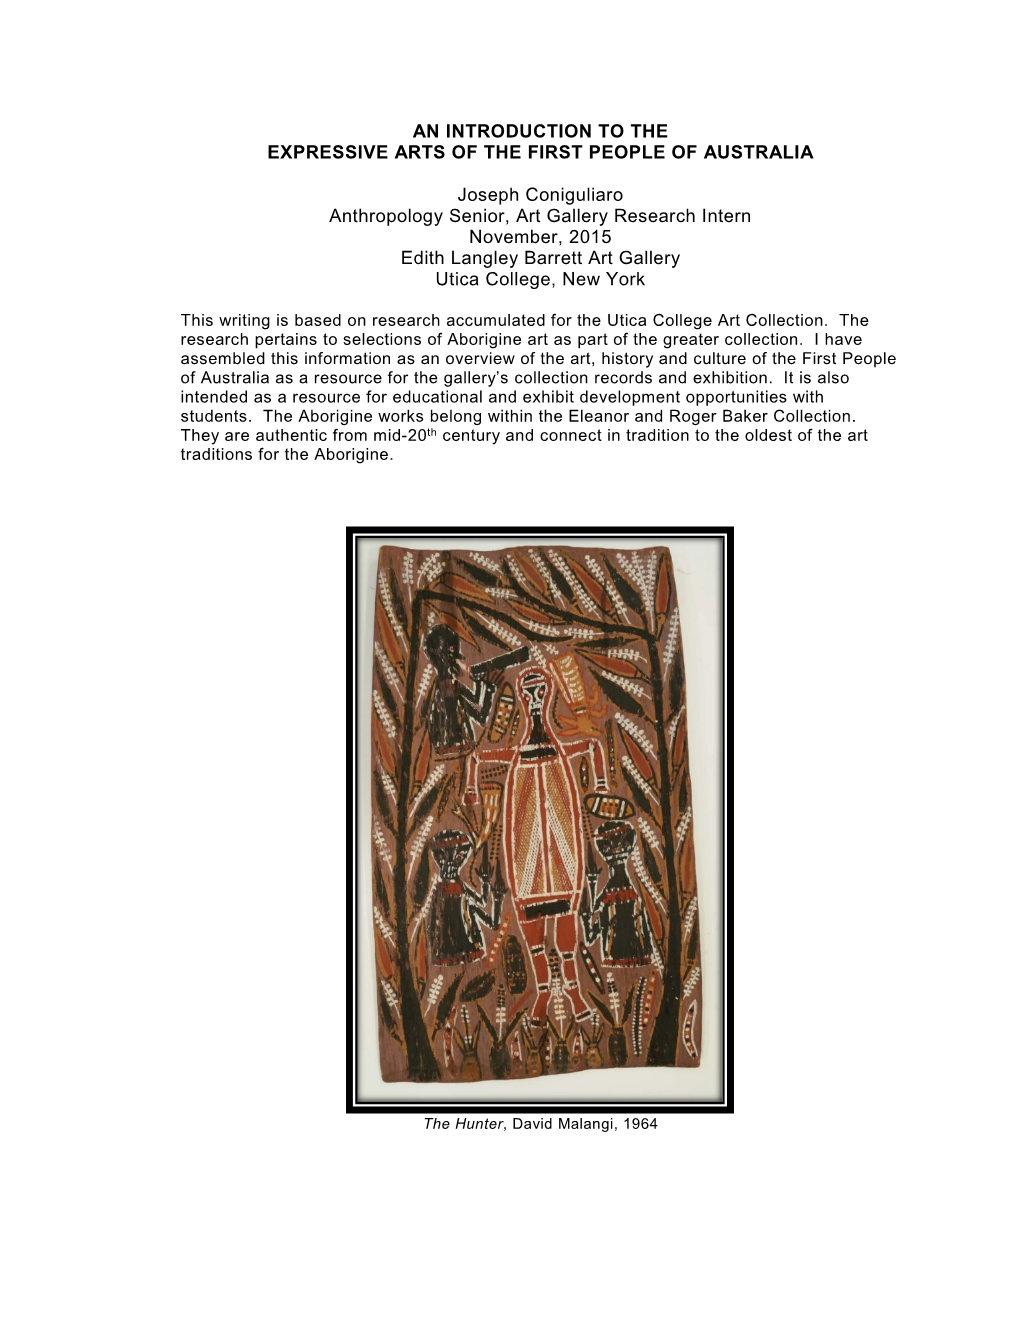 An Introduction to the Expressive Arts of the First People of Australia